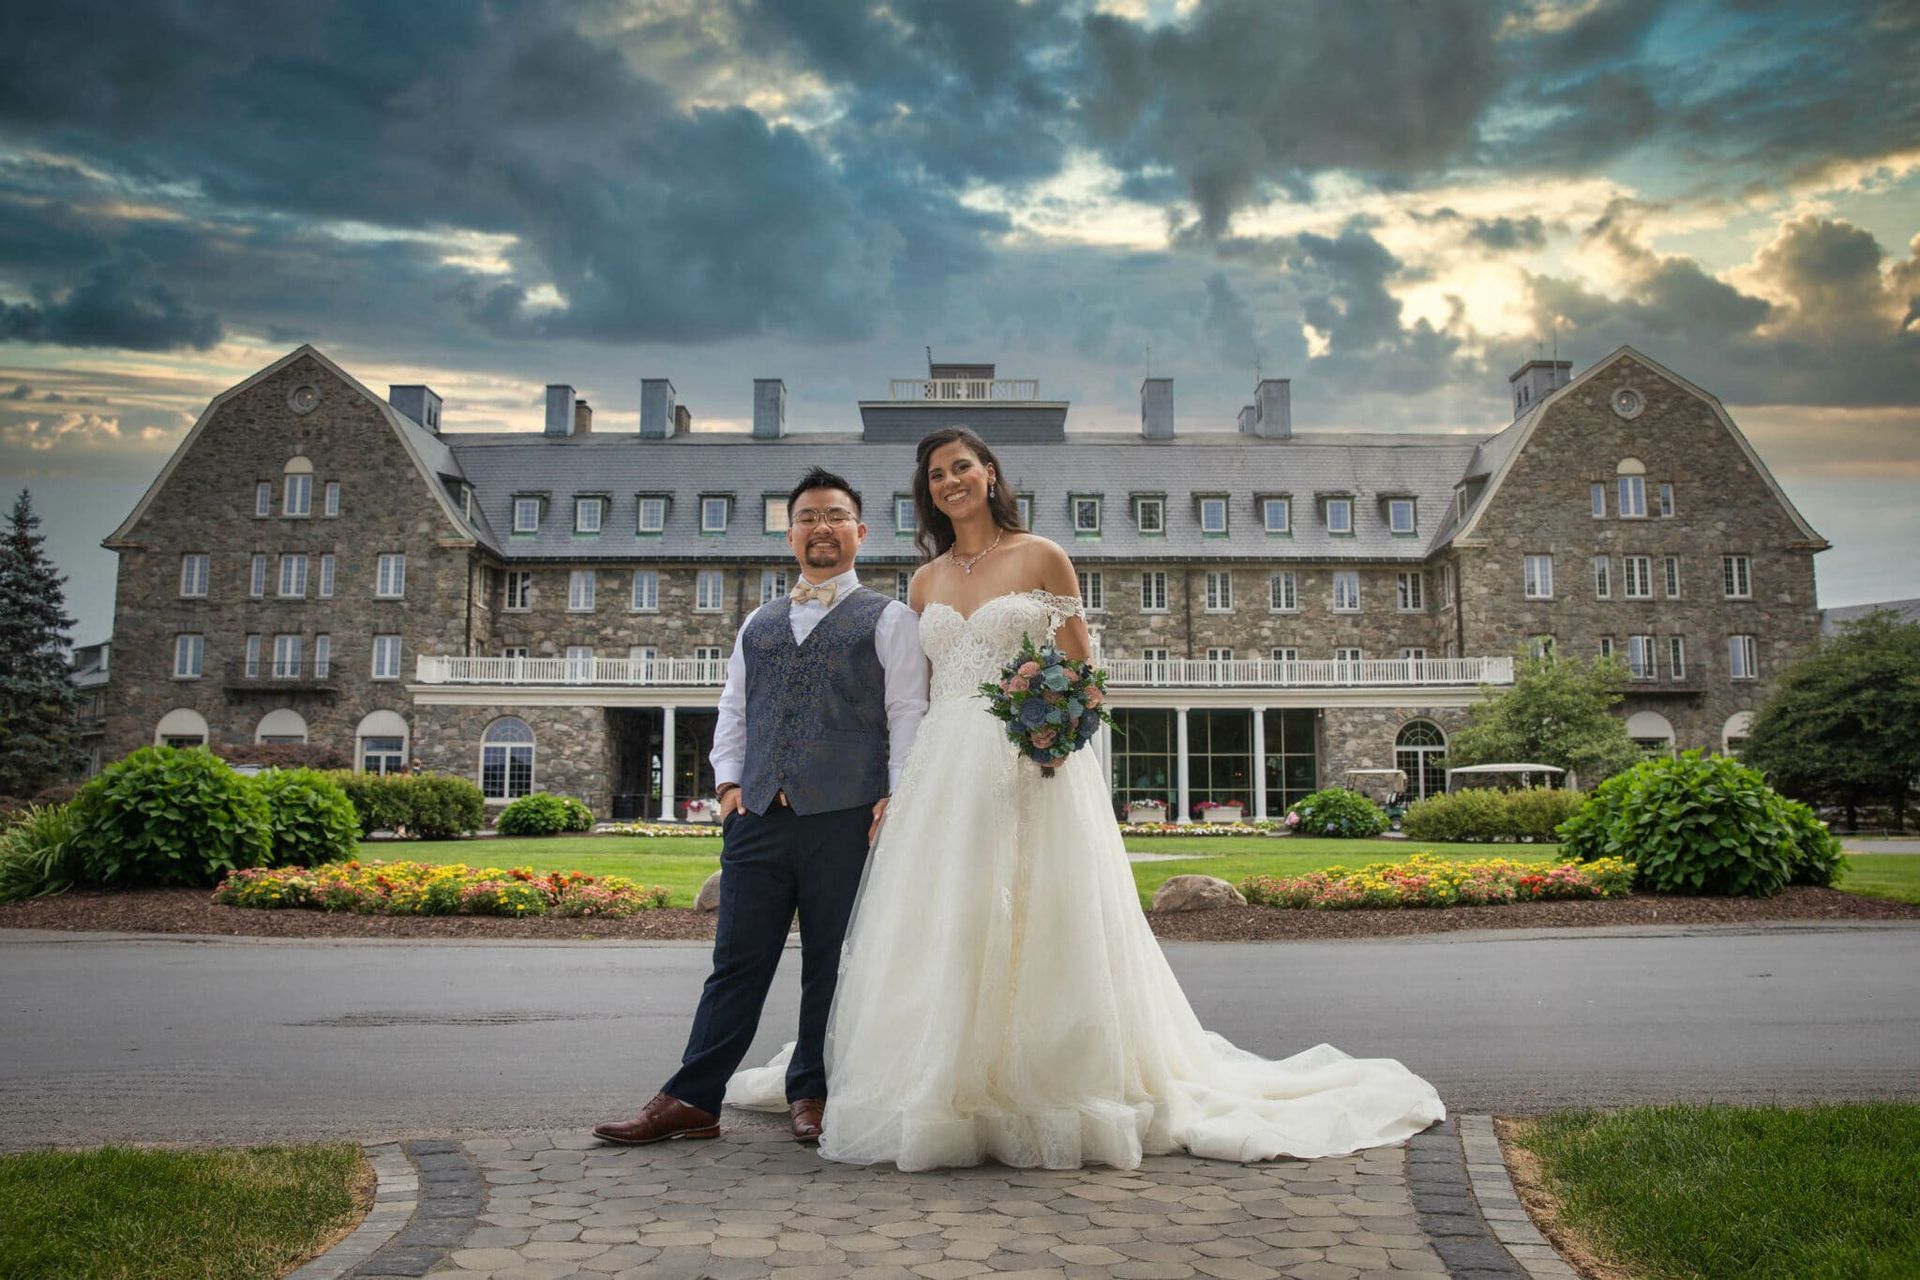 A bride and groom are posing for a picture in front of a large building.